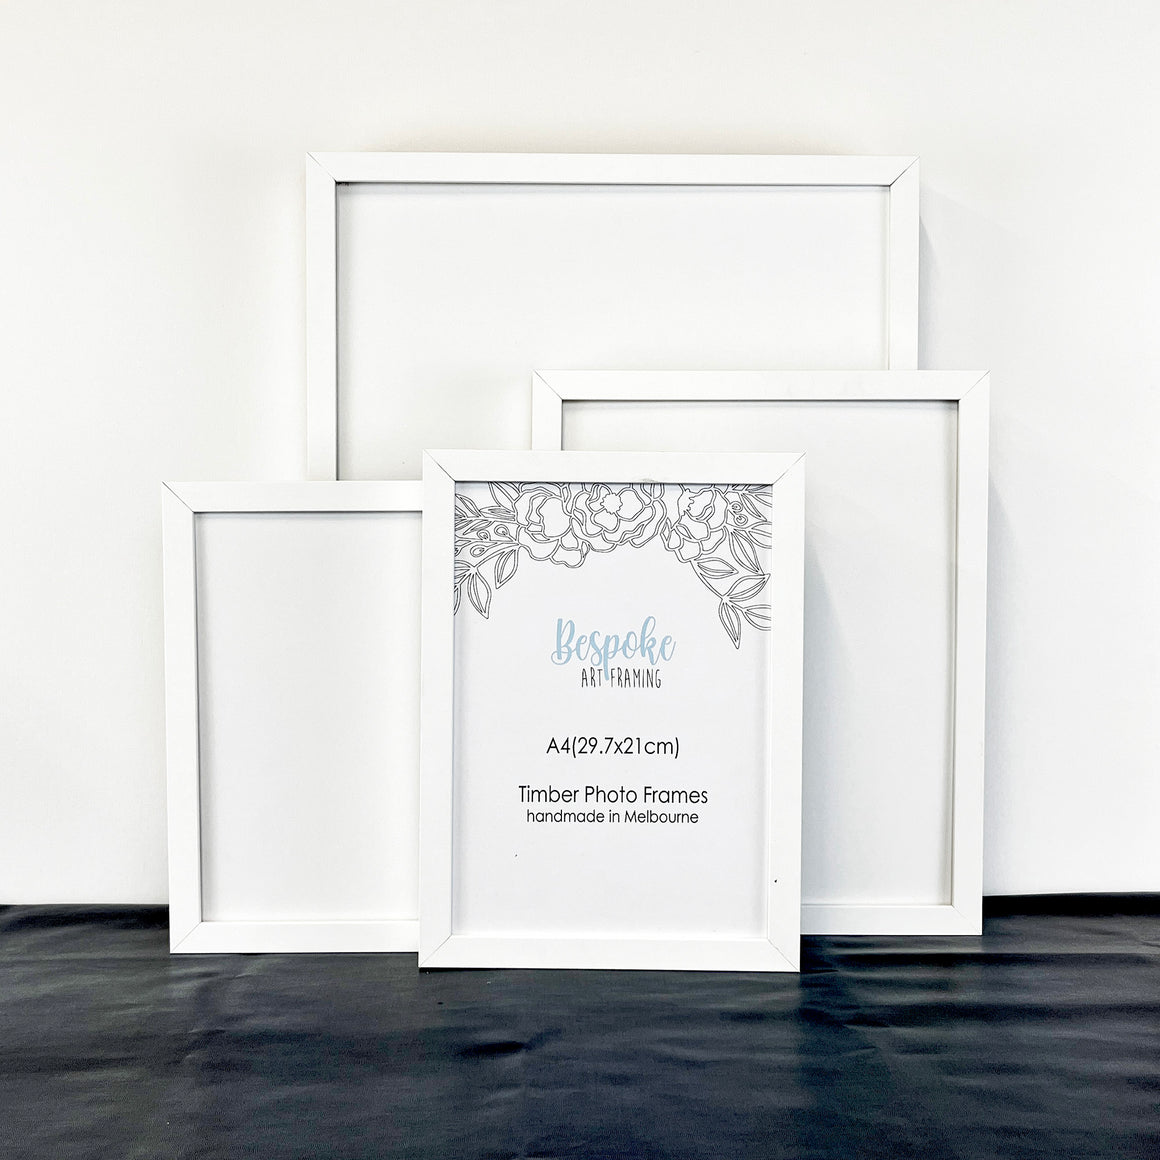 White Photo Frame in a range of Photo and Print Sizes. 11x14", A4, 8"x10", A5, 6"x8". Quality Timber Picture Frame in White made by Custom Framer, includes Perspex and Foam backing 